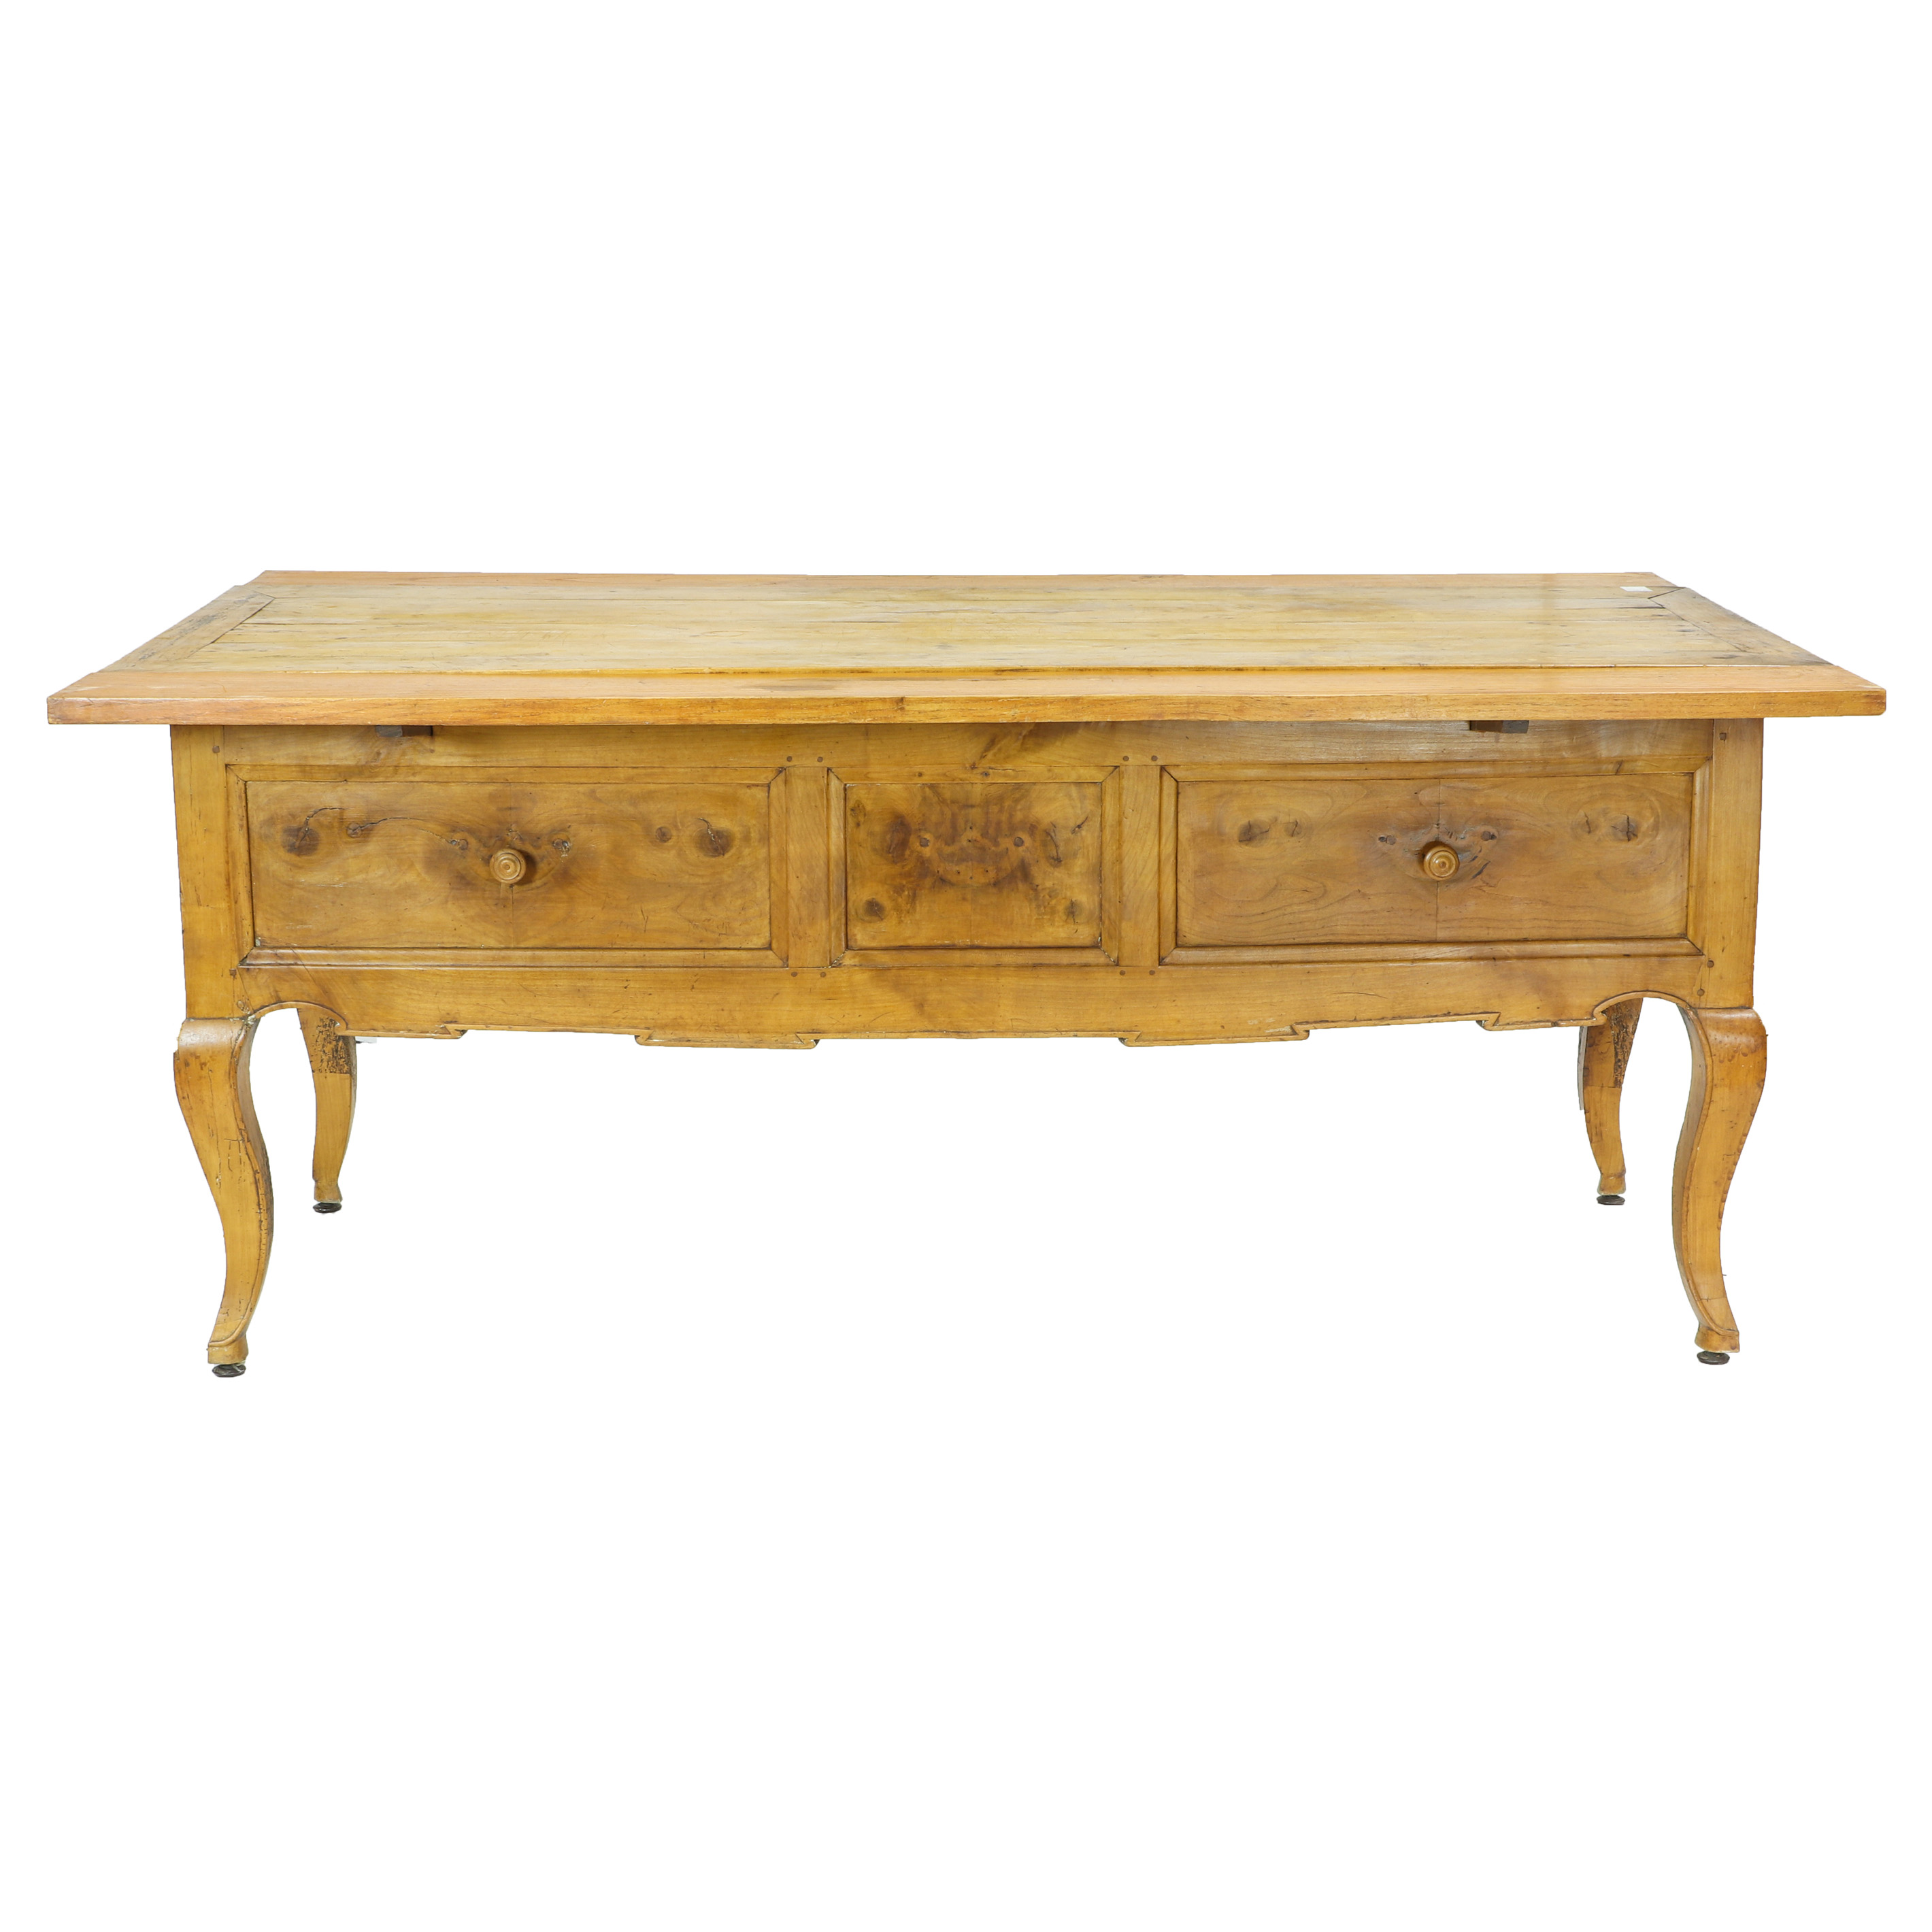 A FRENCH PROVINCIAL STYLE PINE 3a3d76